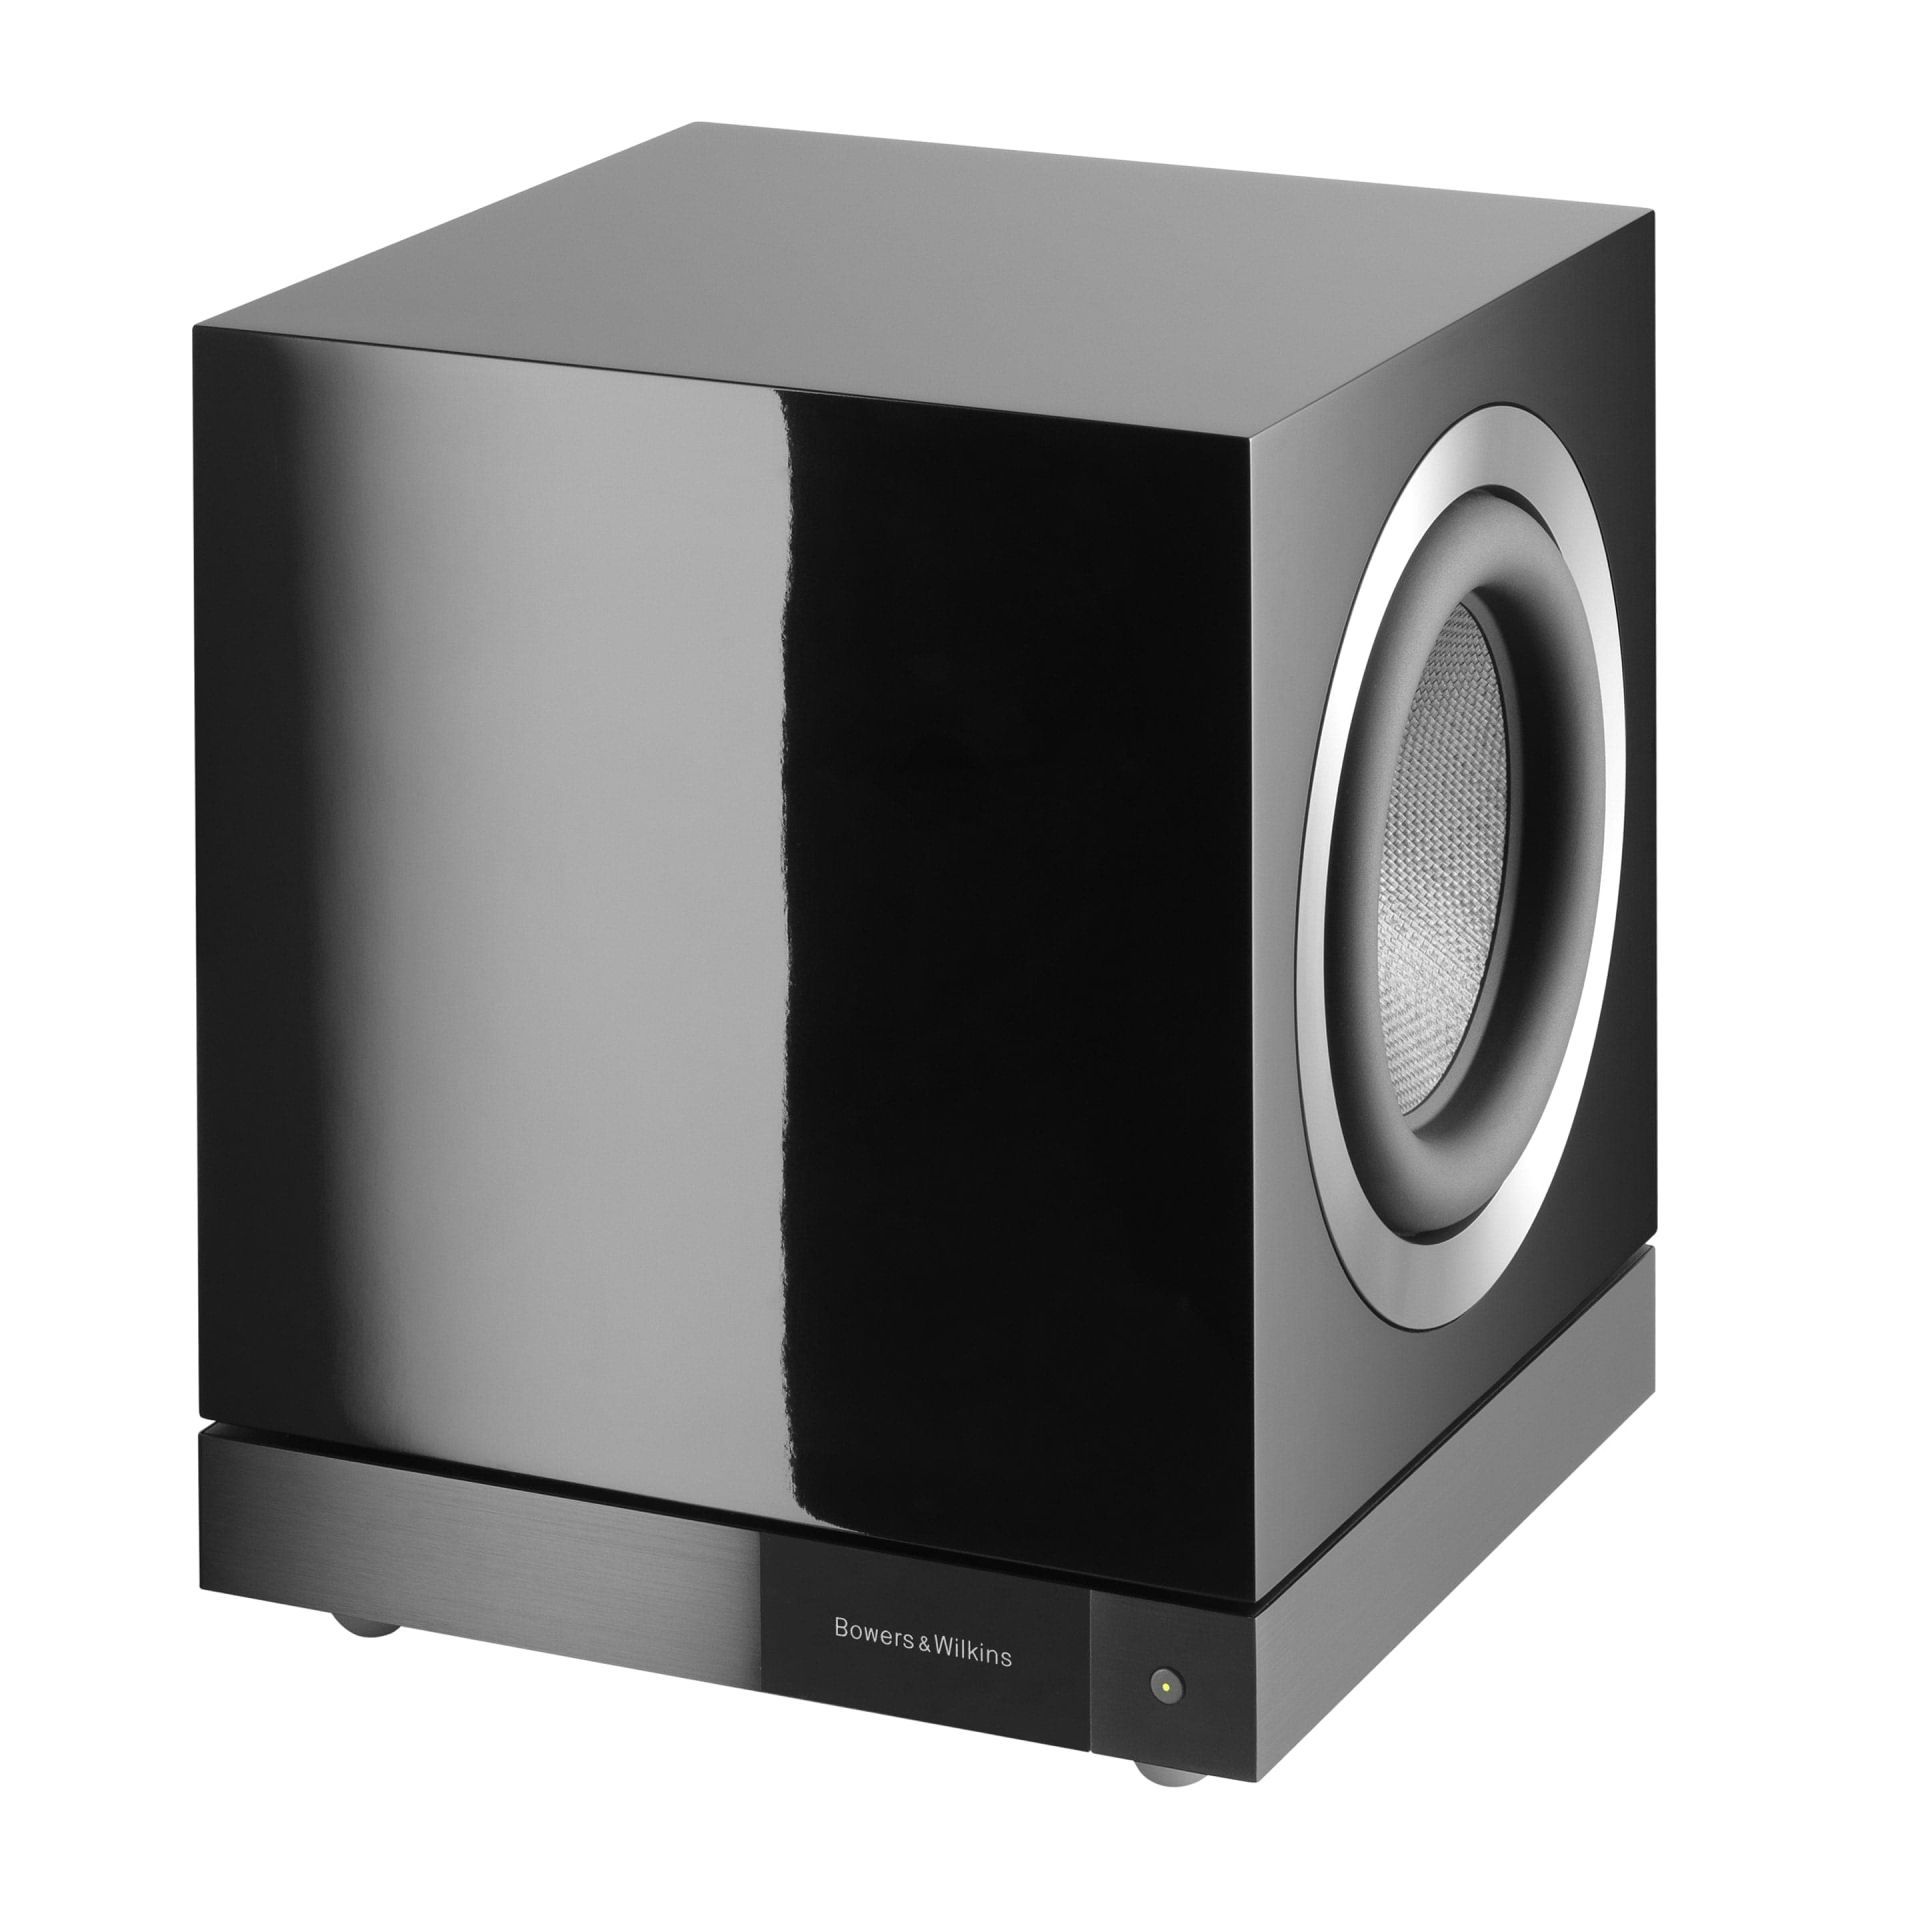 BOWERS & WILKINS DB3D SUBWOOFER